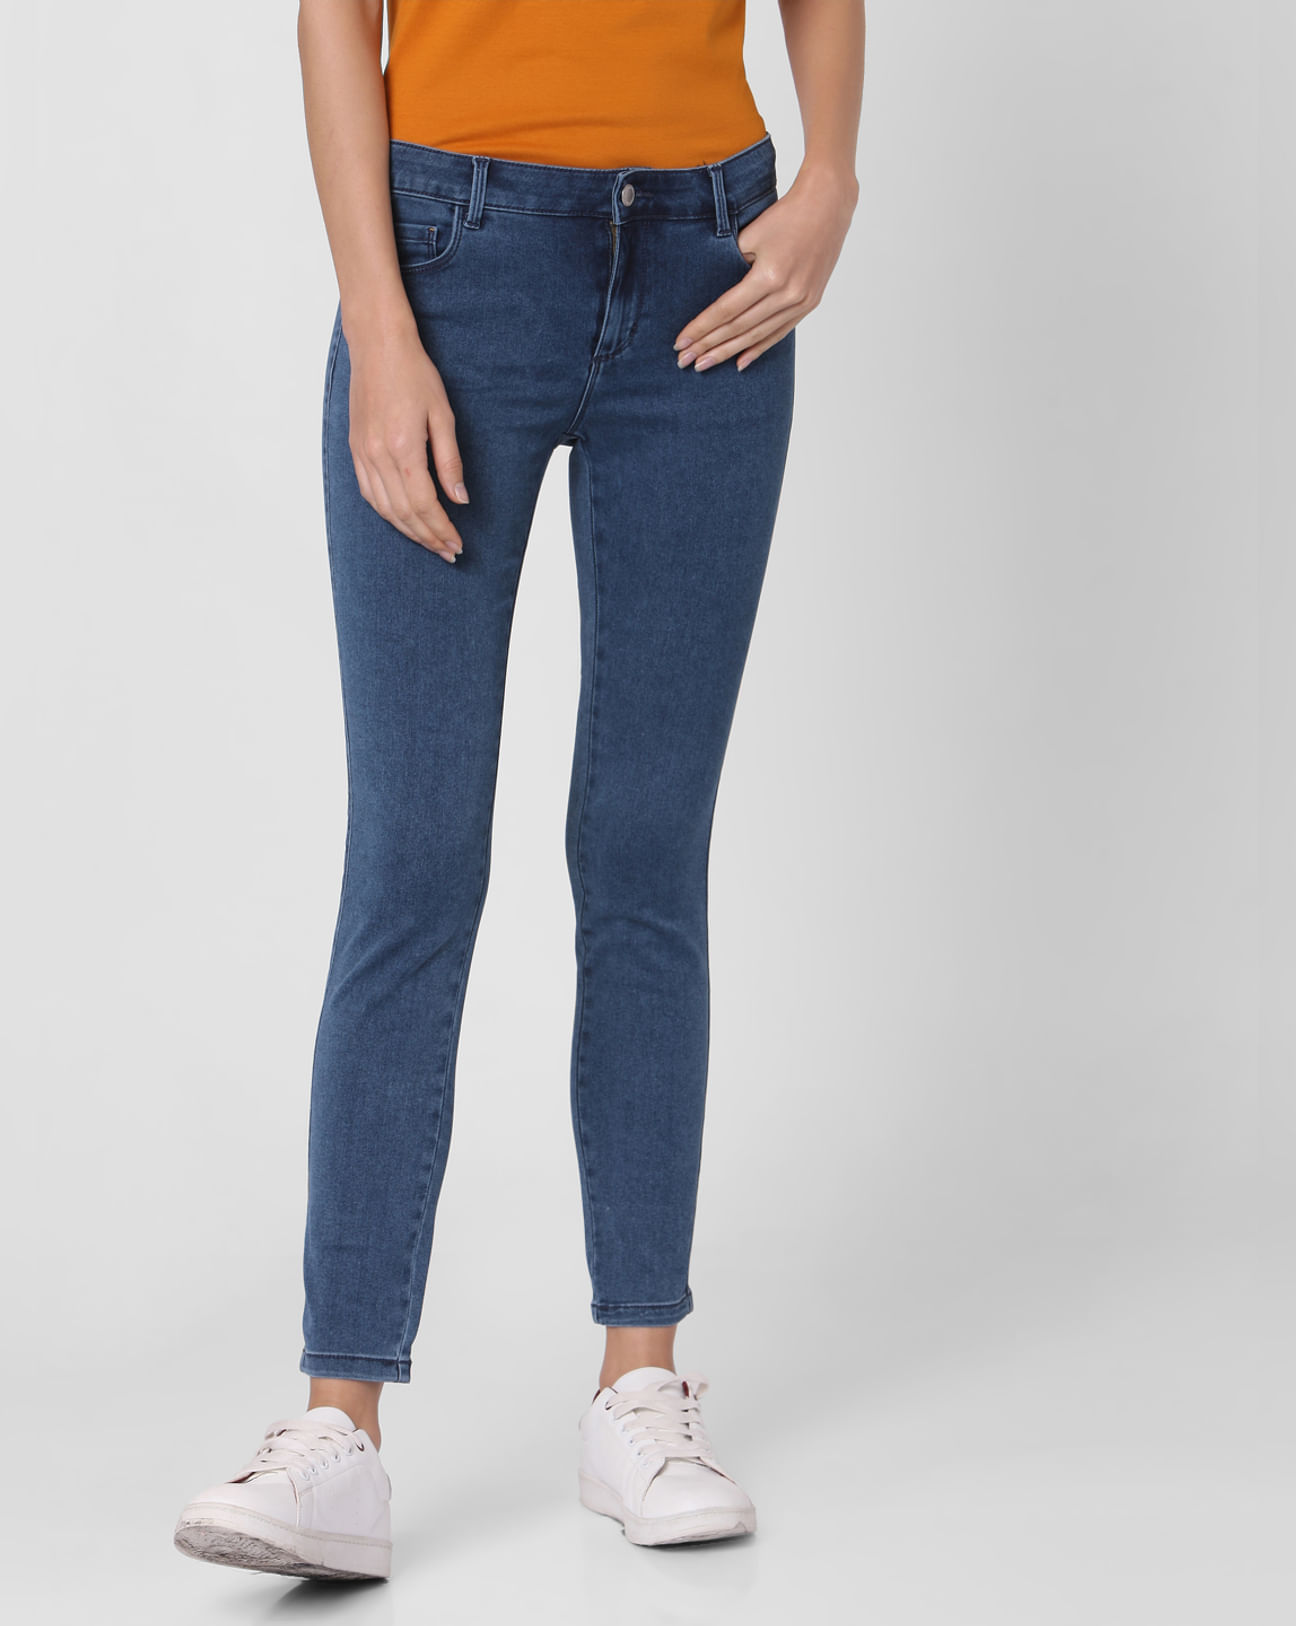 Buy Perfect Blue Mid Rise Jeggings Online In India.